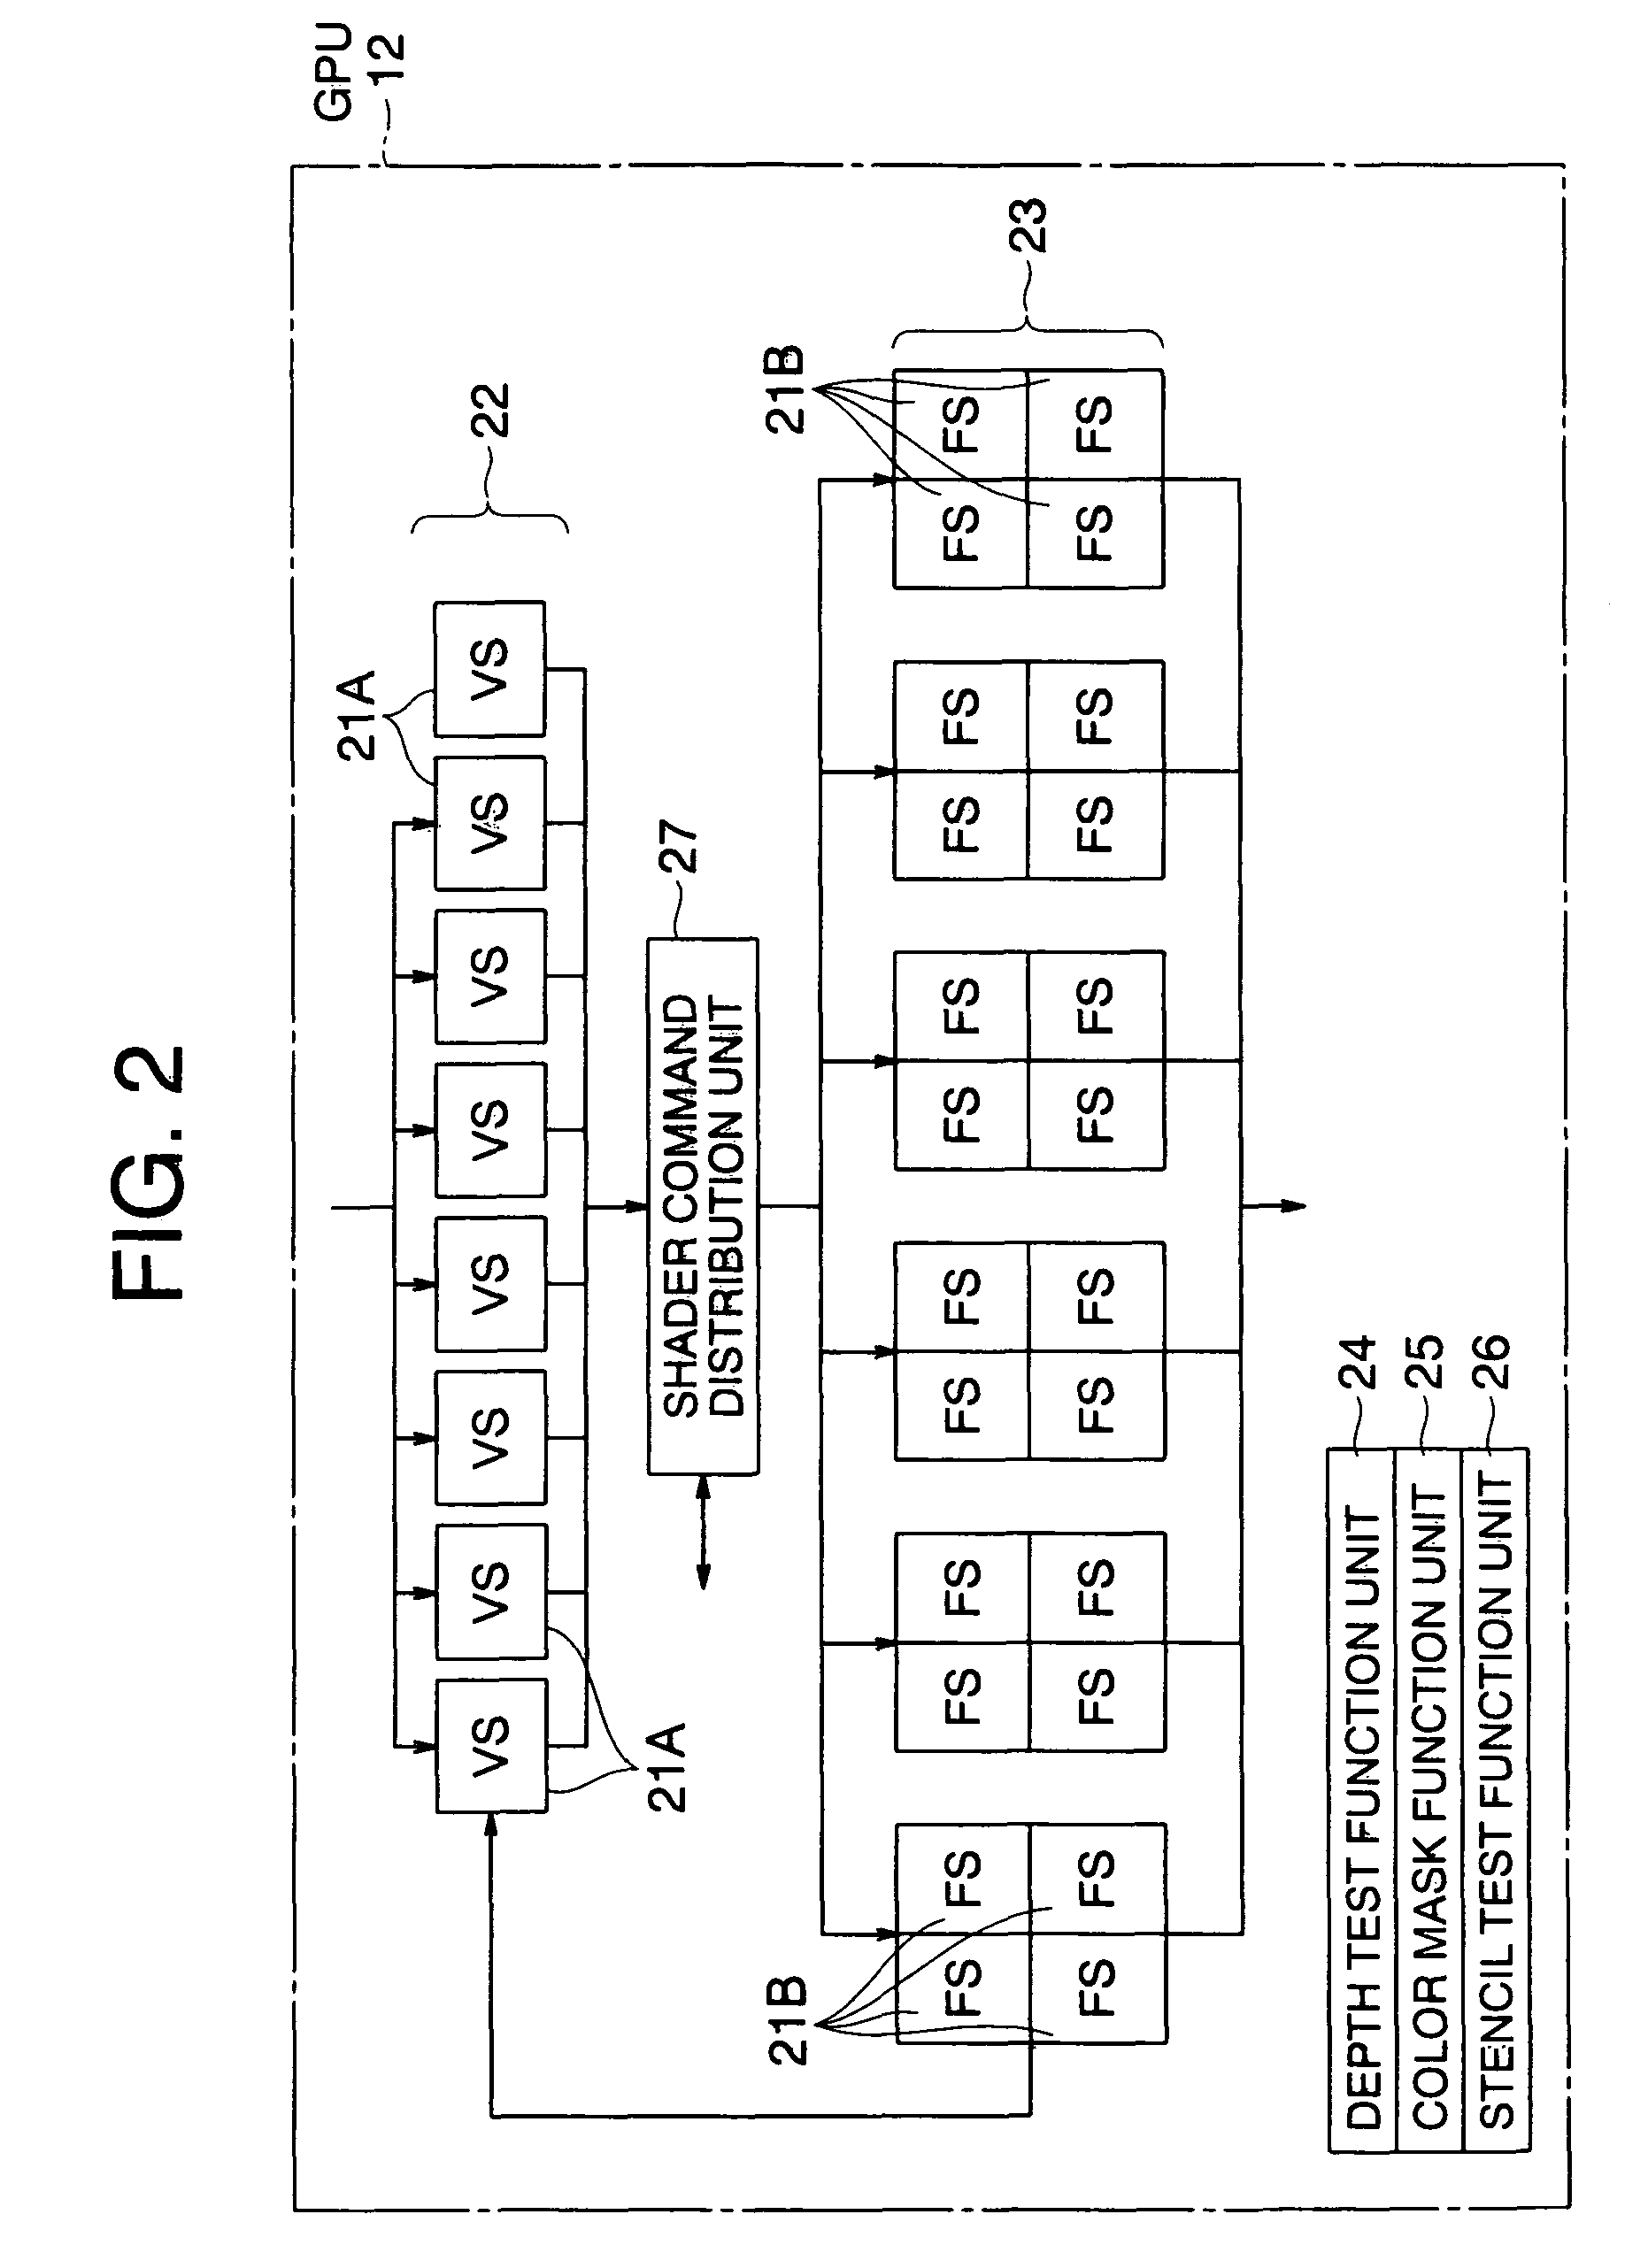 Sliced data structure for particle-based simulation, and method for loading particle-based simulation using sliced data structure into GPU